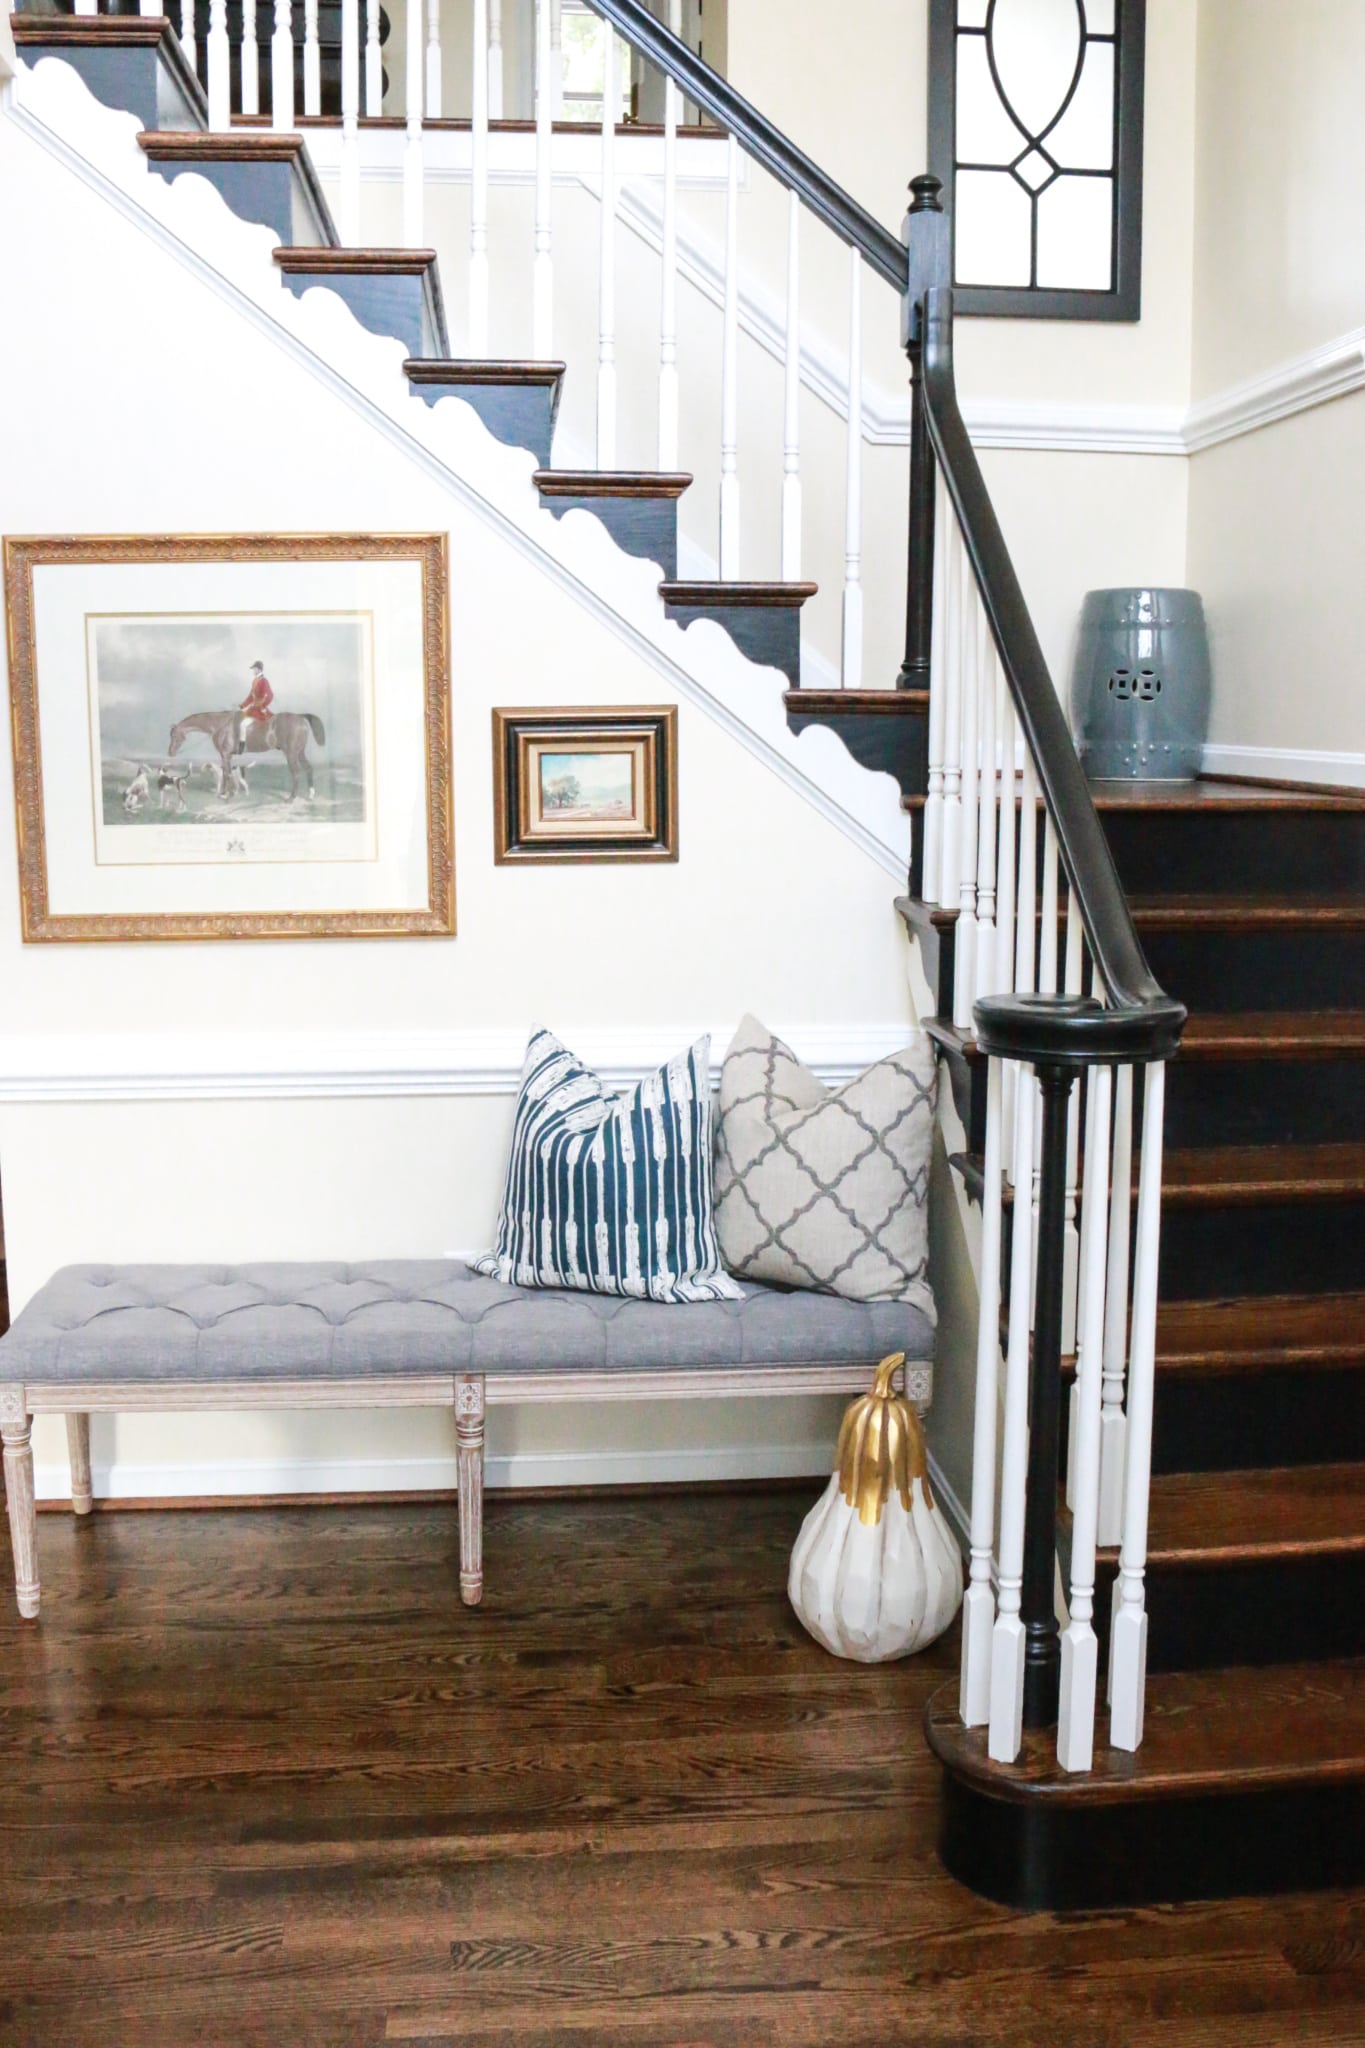 5 Ways to Add Subtle Fall Touches to your Home